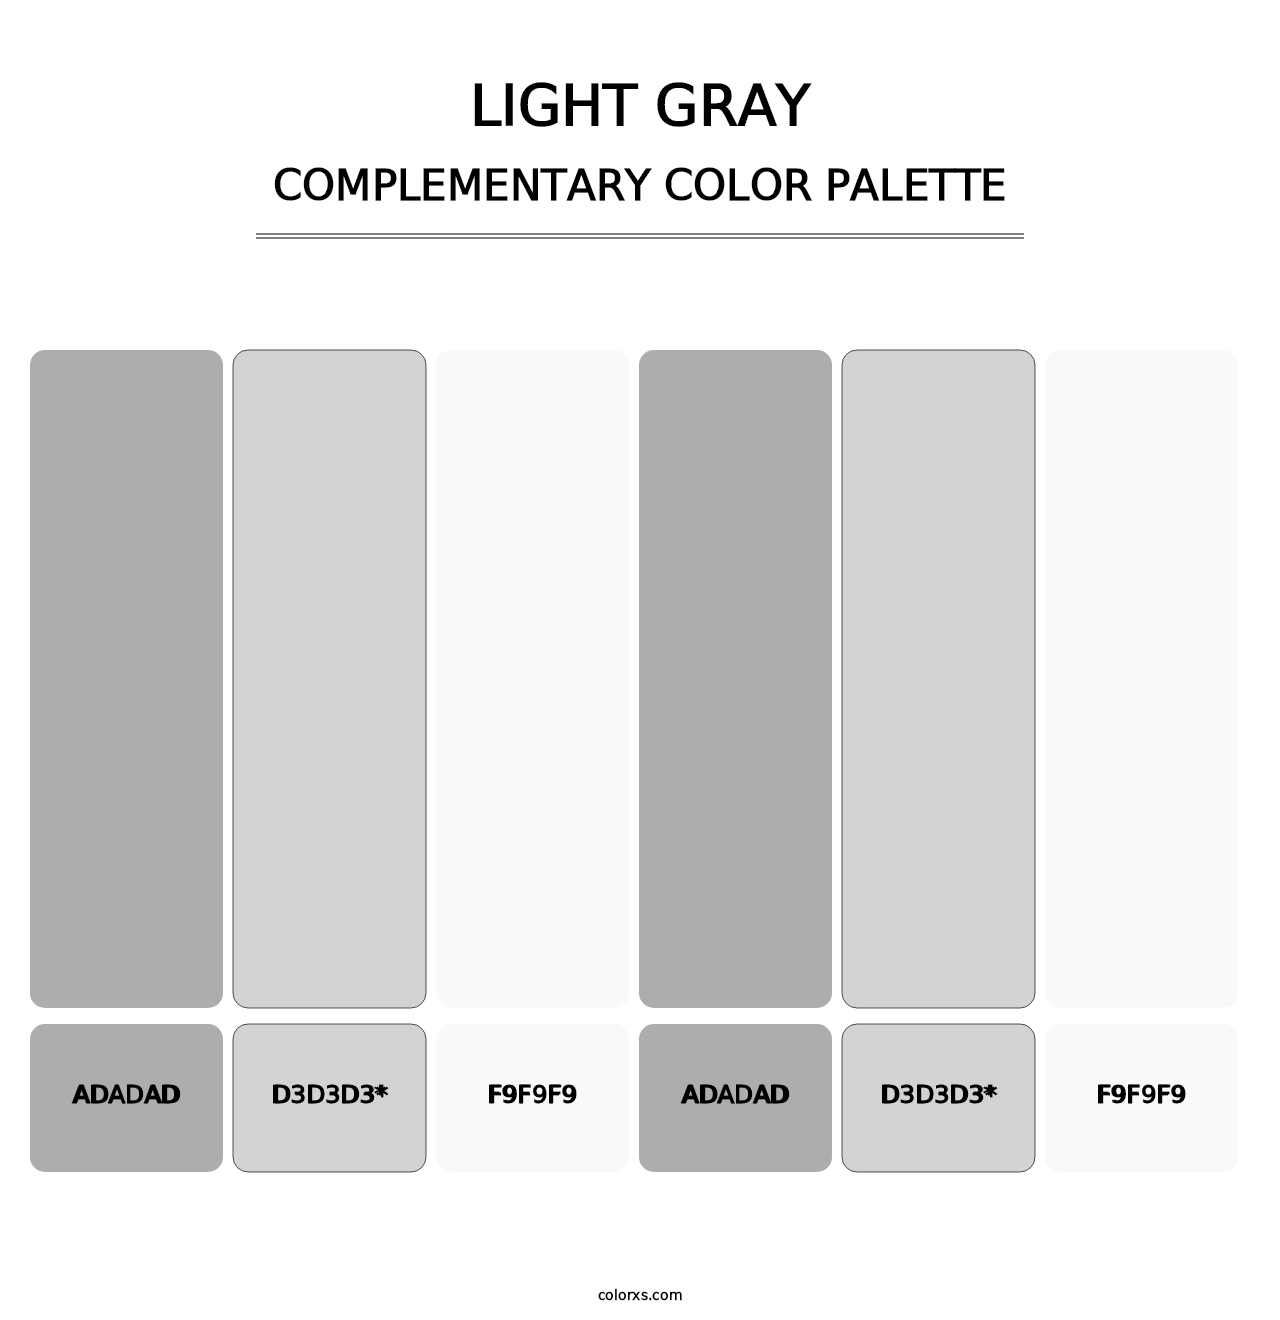 Light Gray - Complementary Color Palette